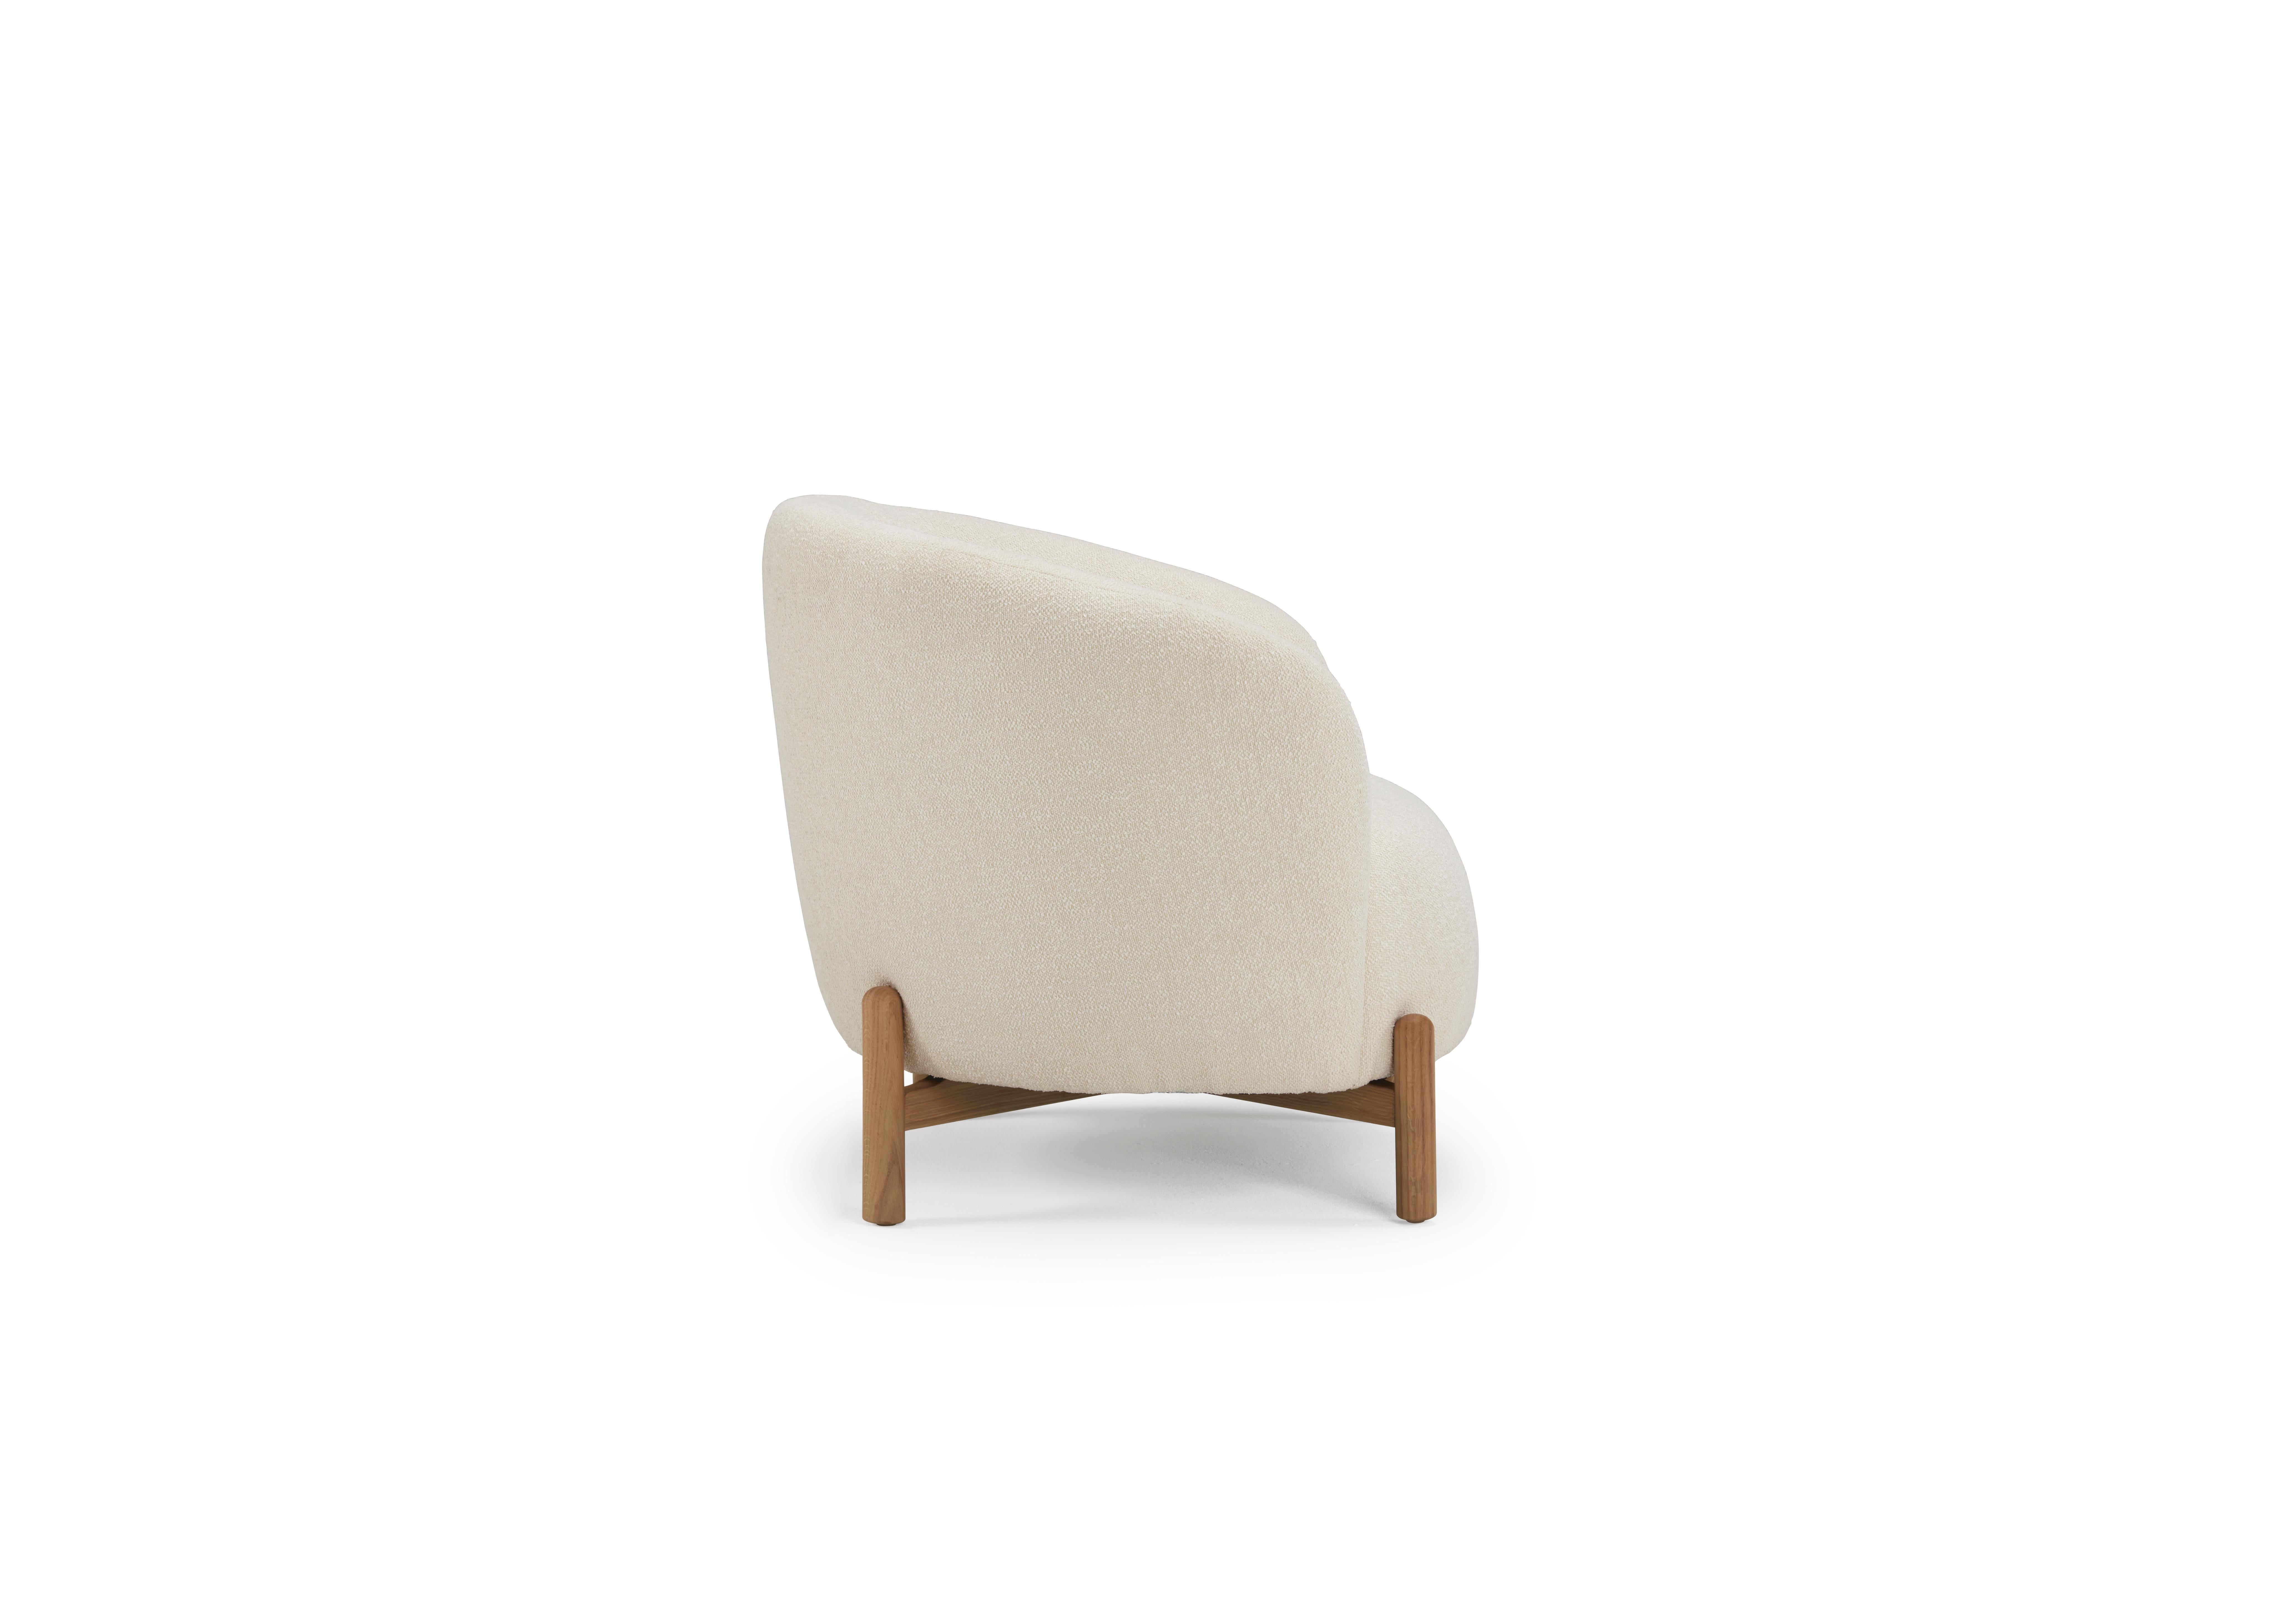 European Hayche Glover Armchair - Wooden Base - Crema, UK, Made to Order For Sale